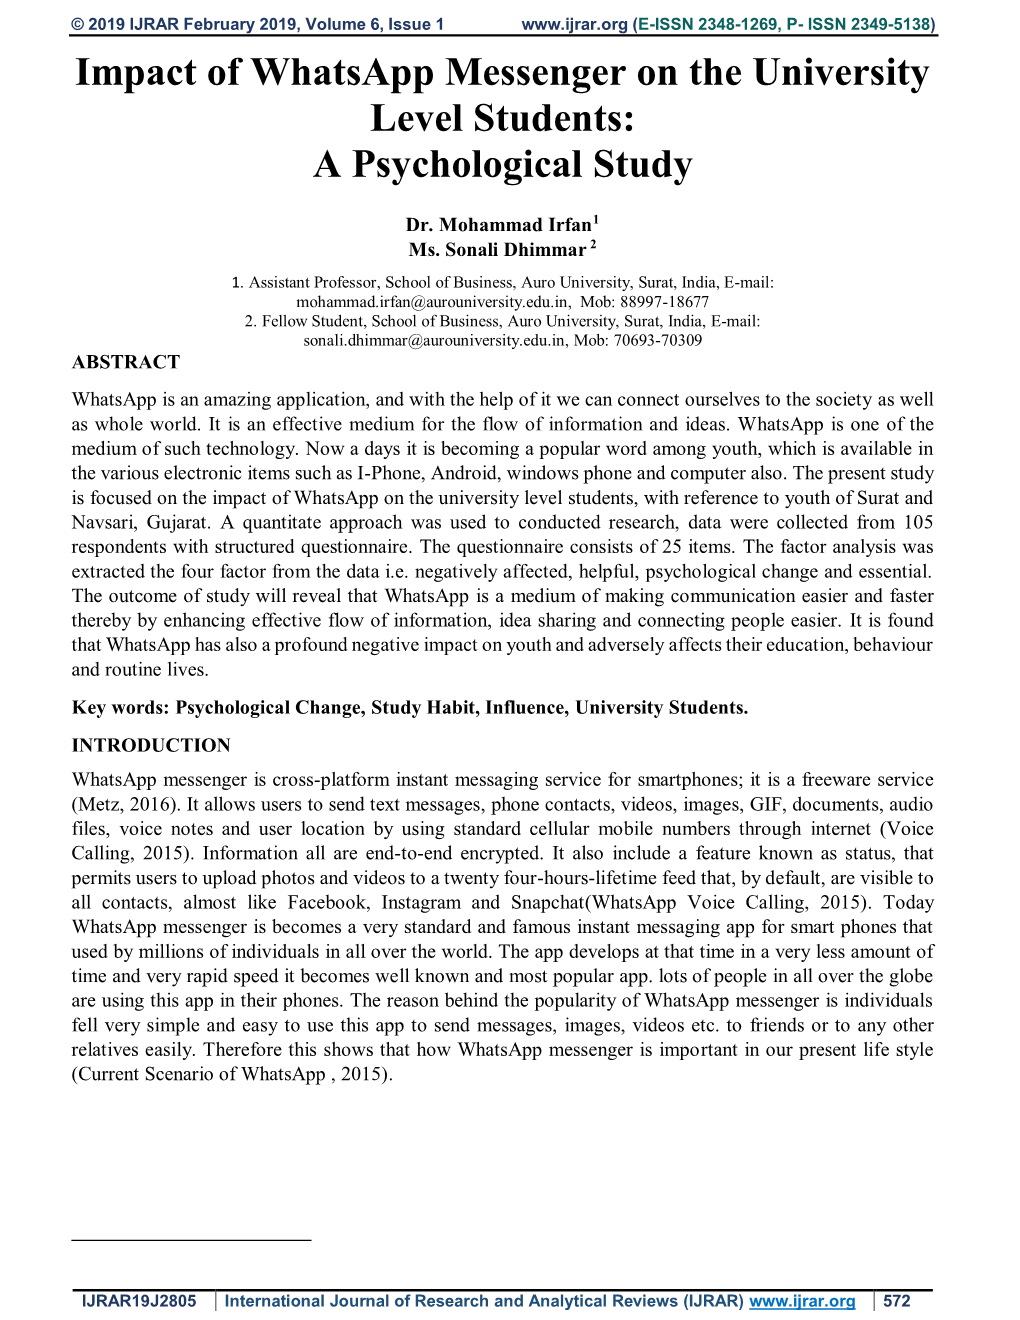 Impact of Whatsapp Messenger on the University Level Students: a Psychological Study